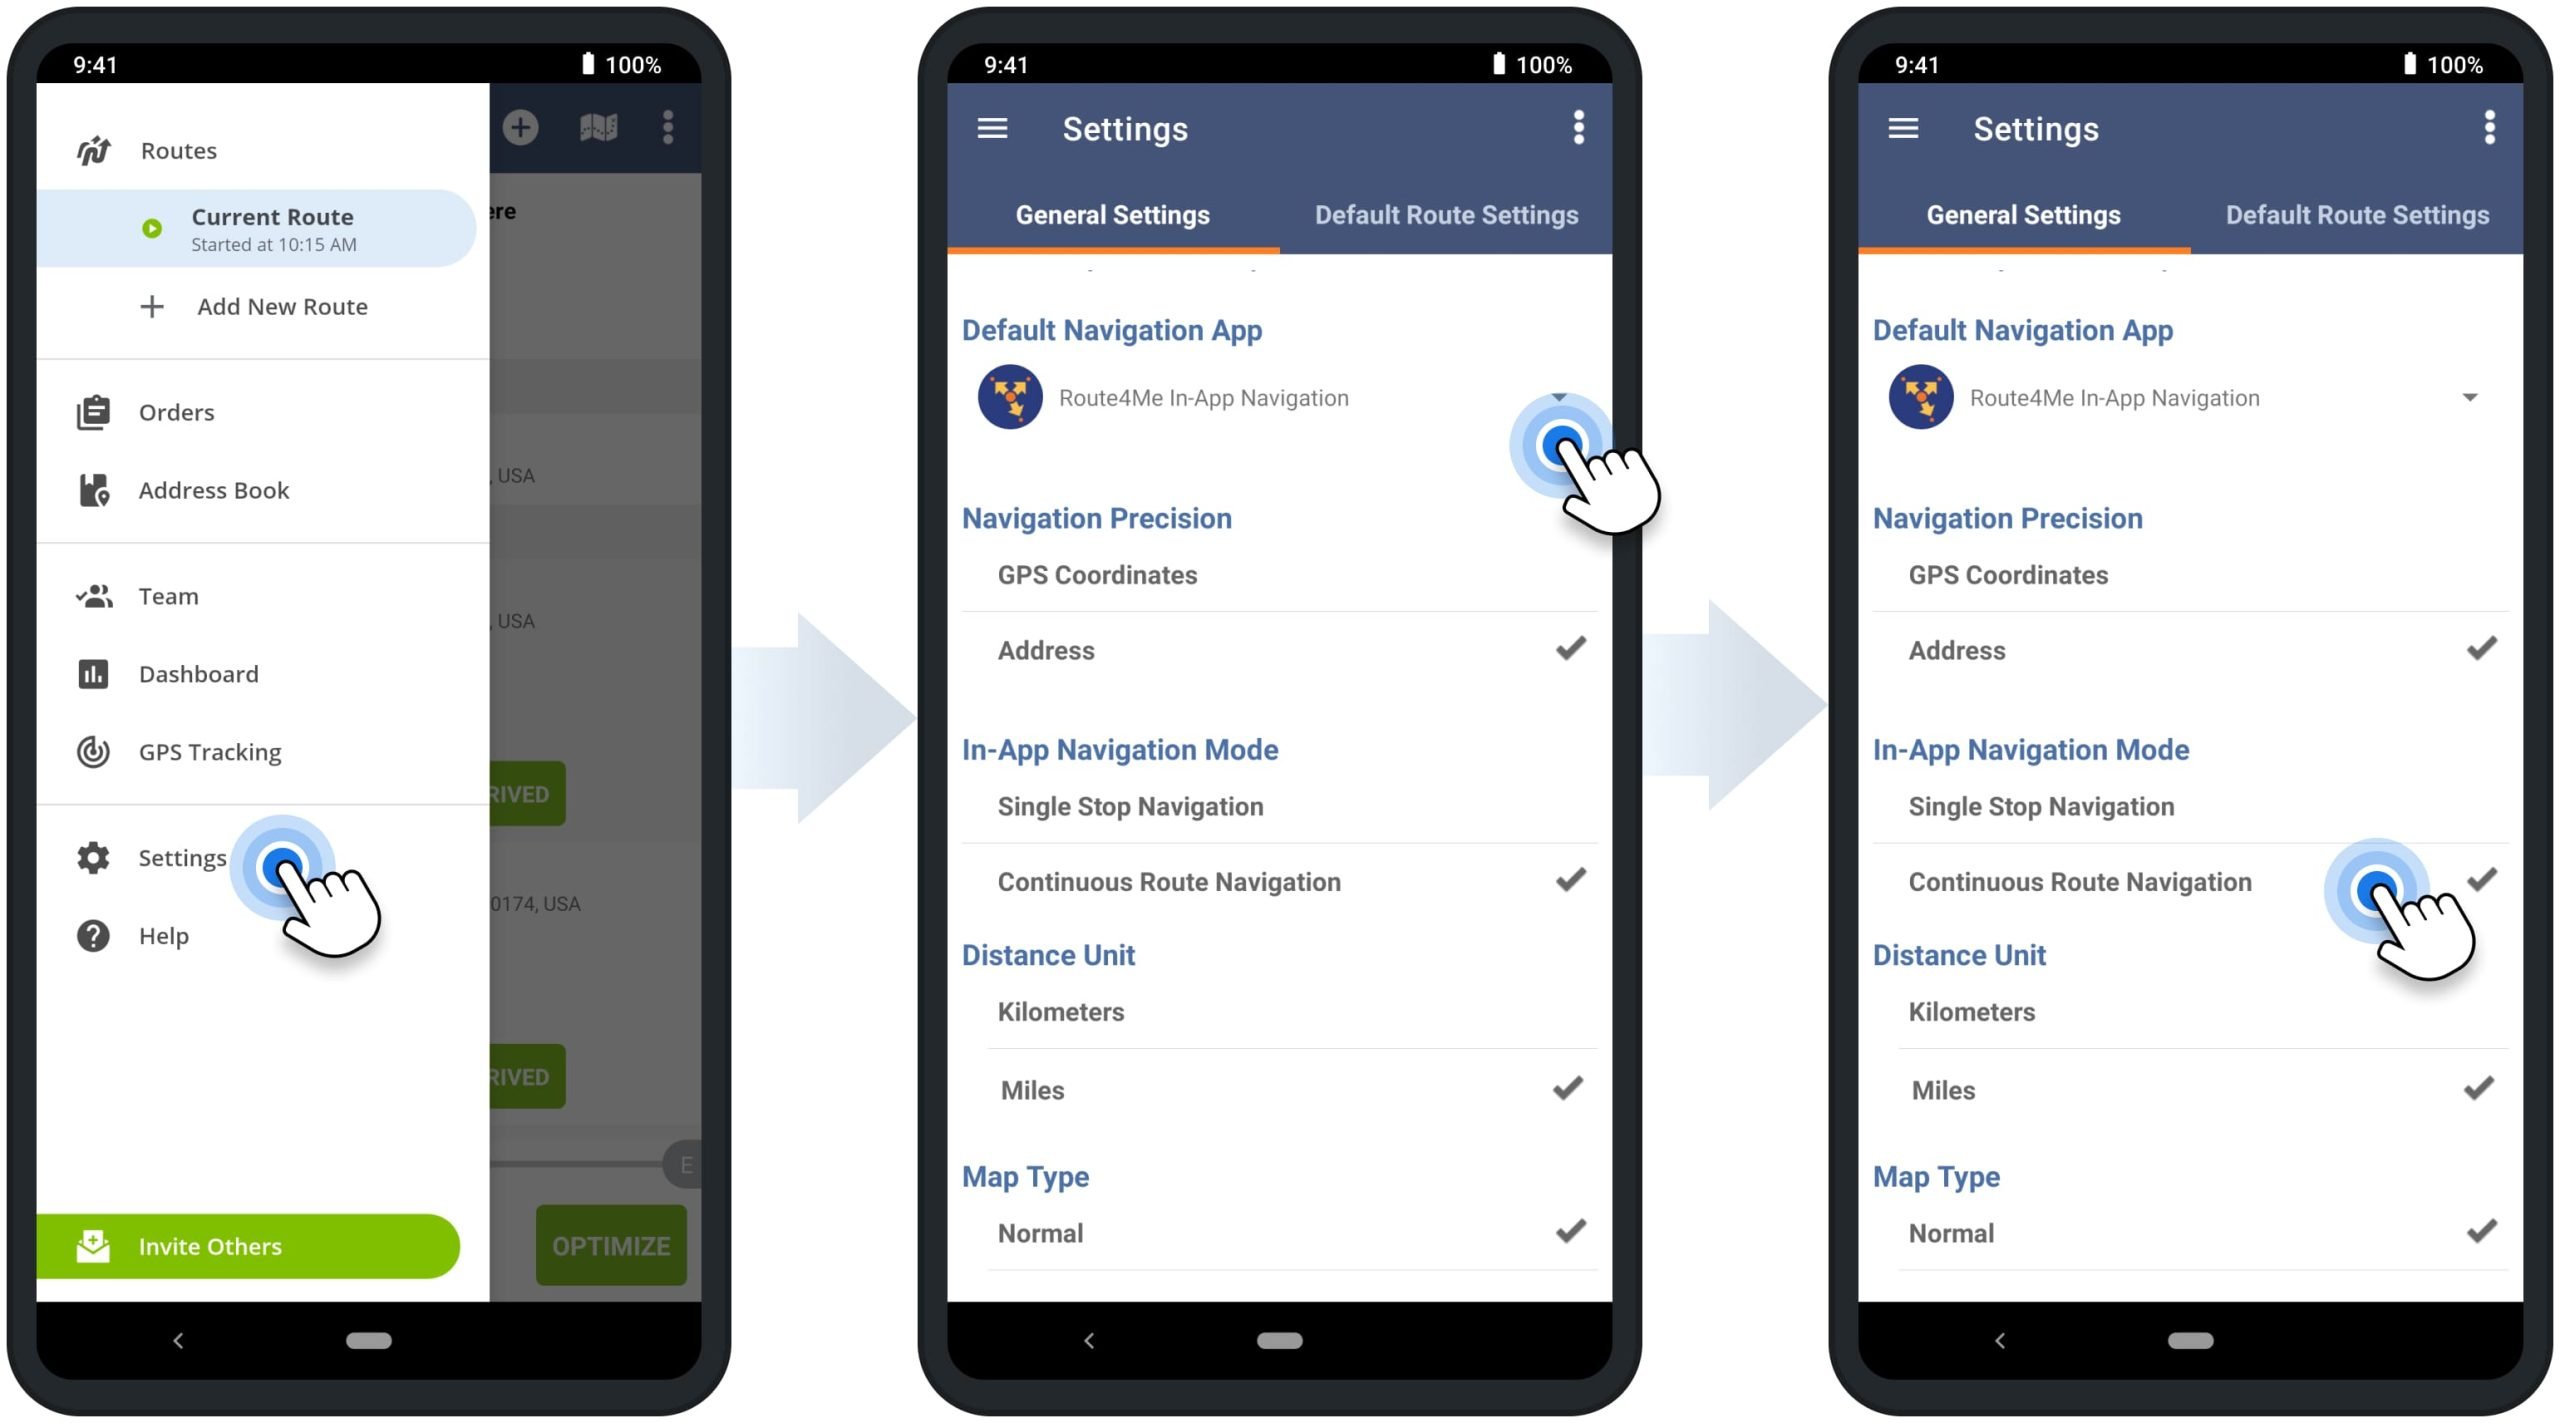 Route planner integrated navigation settings for the default navigation app, continuous route navigation, and single-stop navigation.